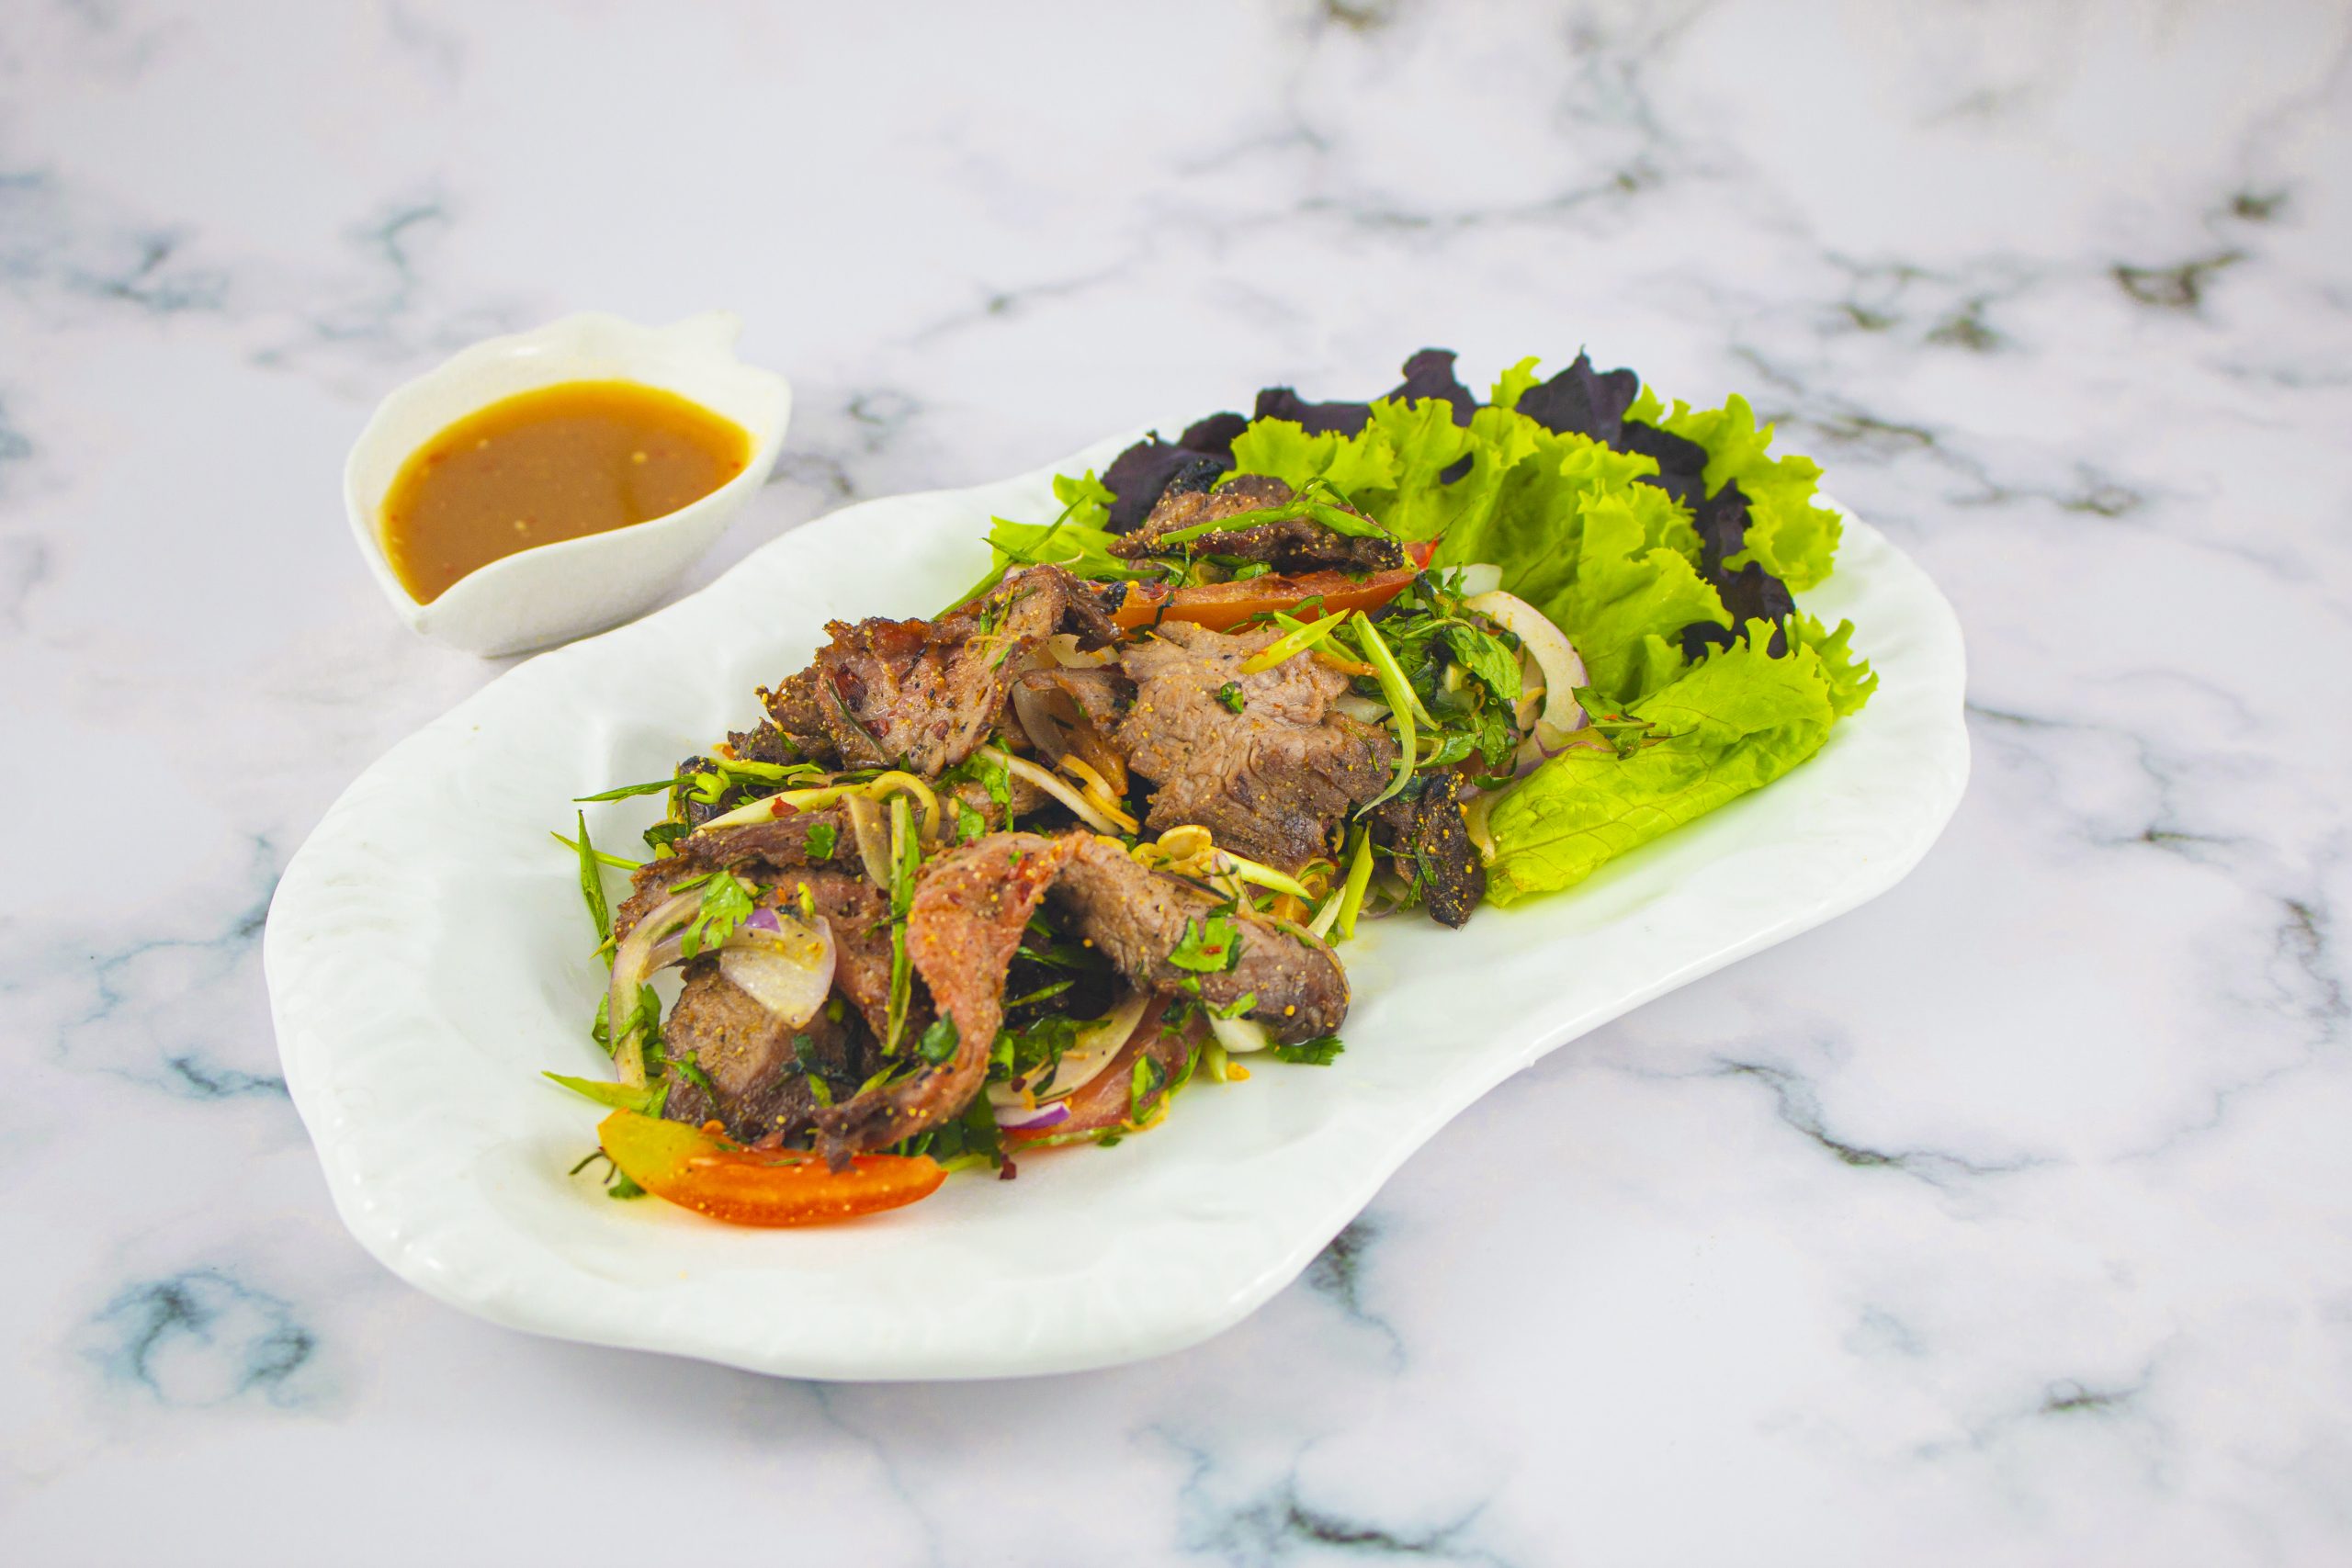 North-Eastern Thai Style Grilled Beef Salad from takeaway menu of Manilahouse